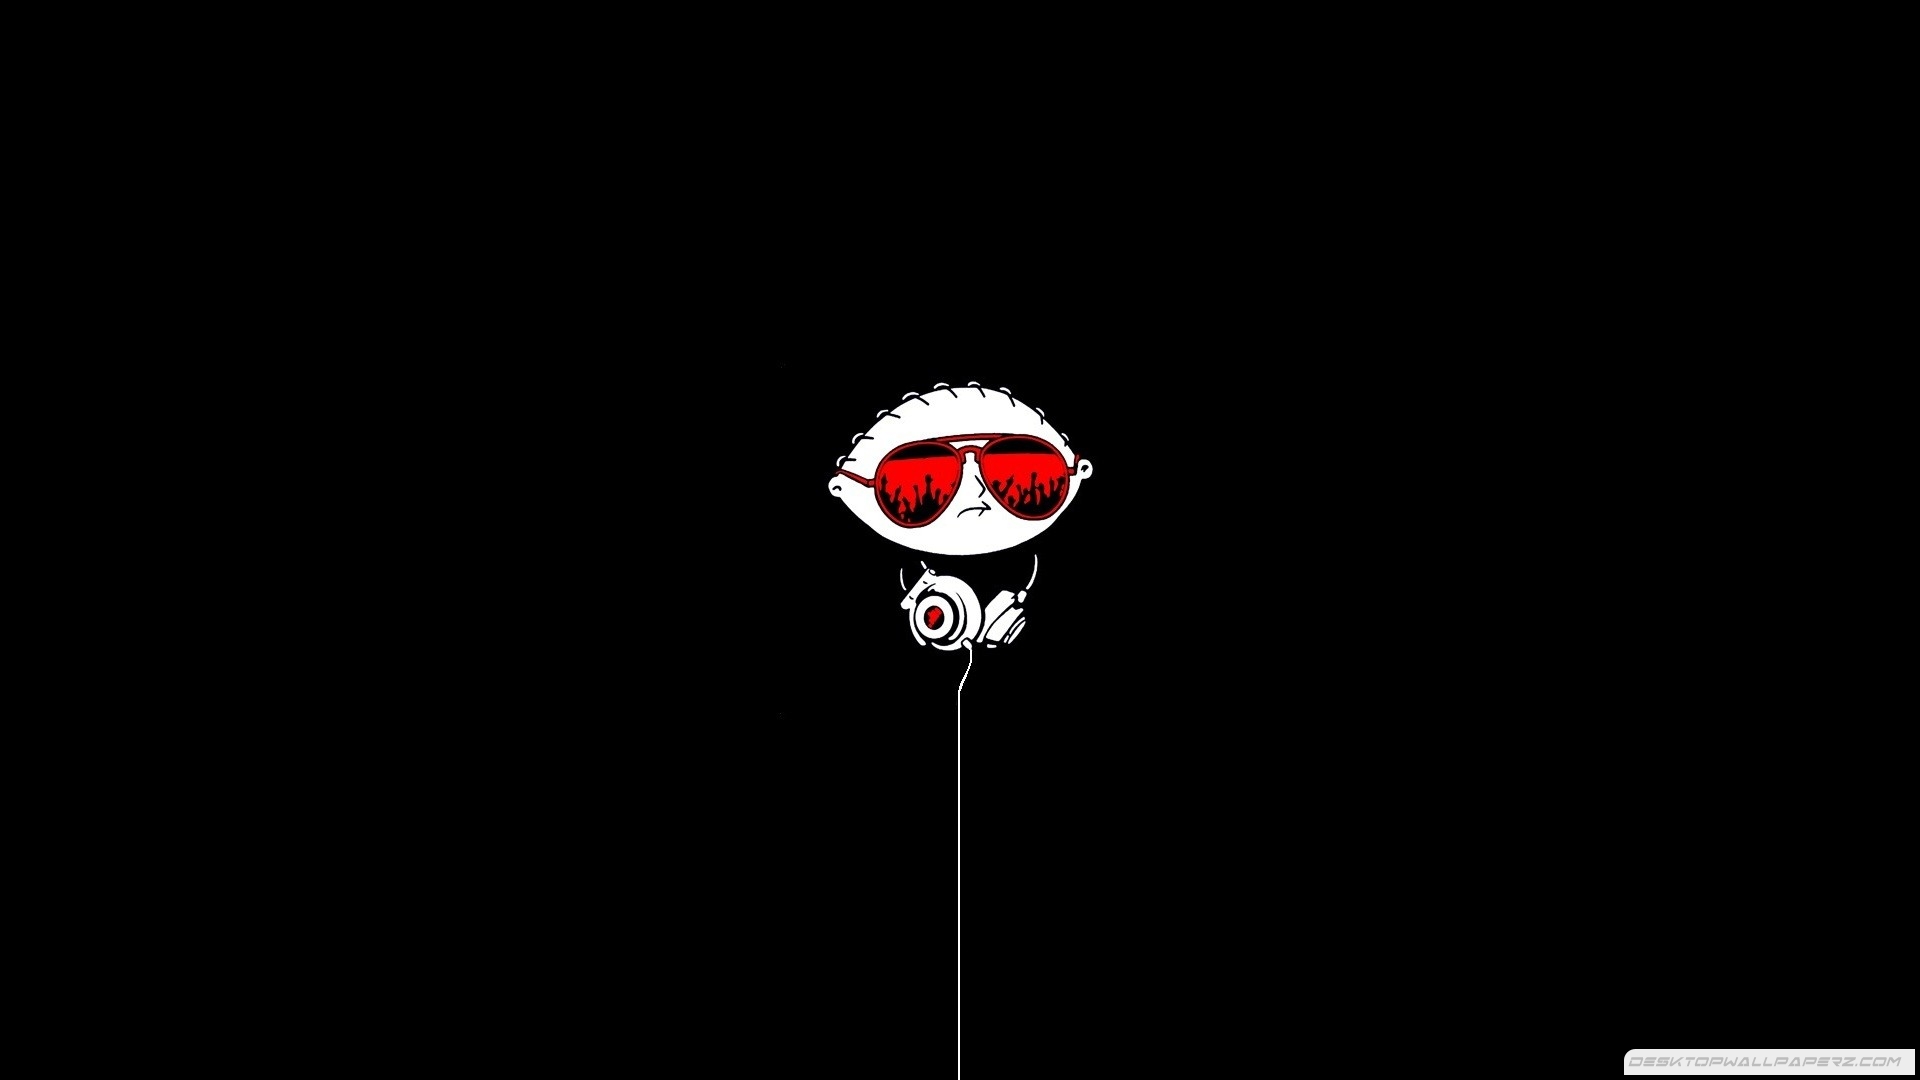 Family Guy Glasses Funny Stewie Griffin Dj Wallpaper